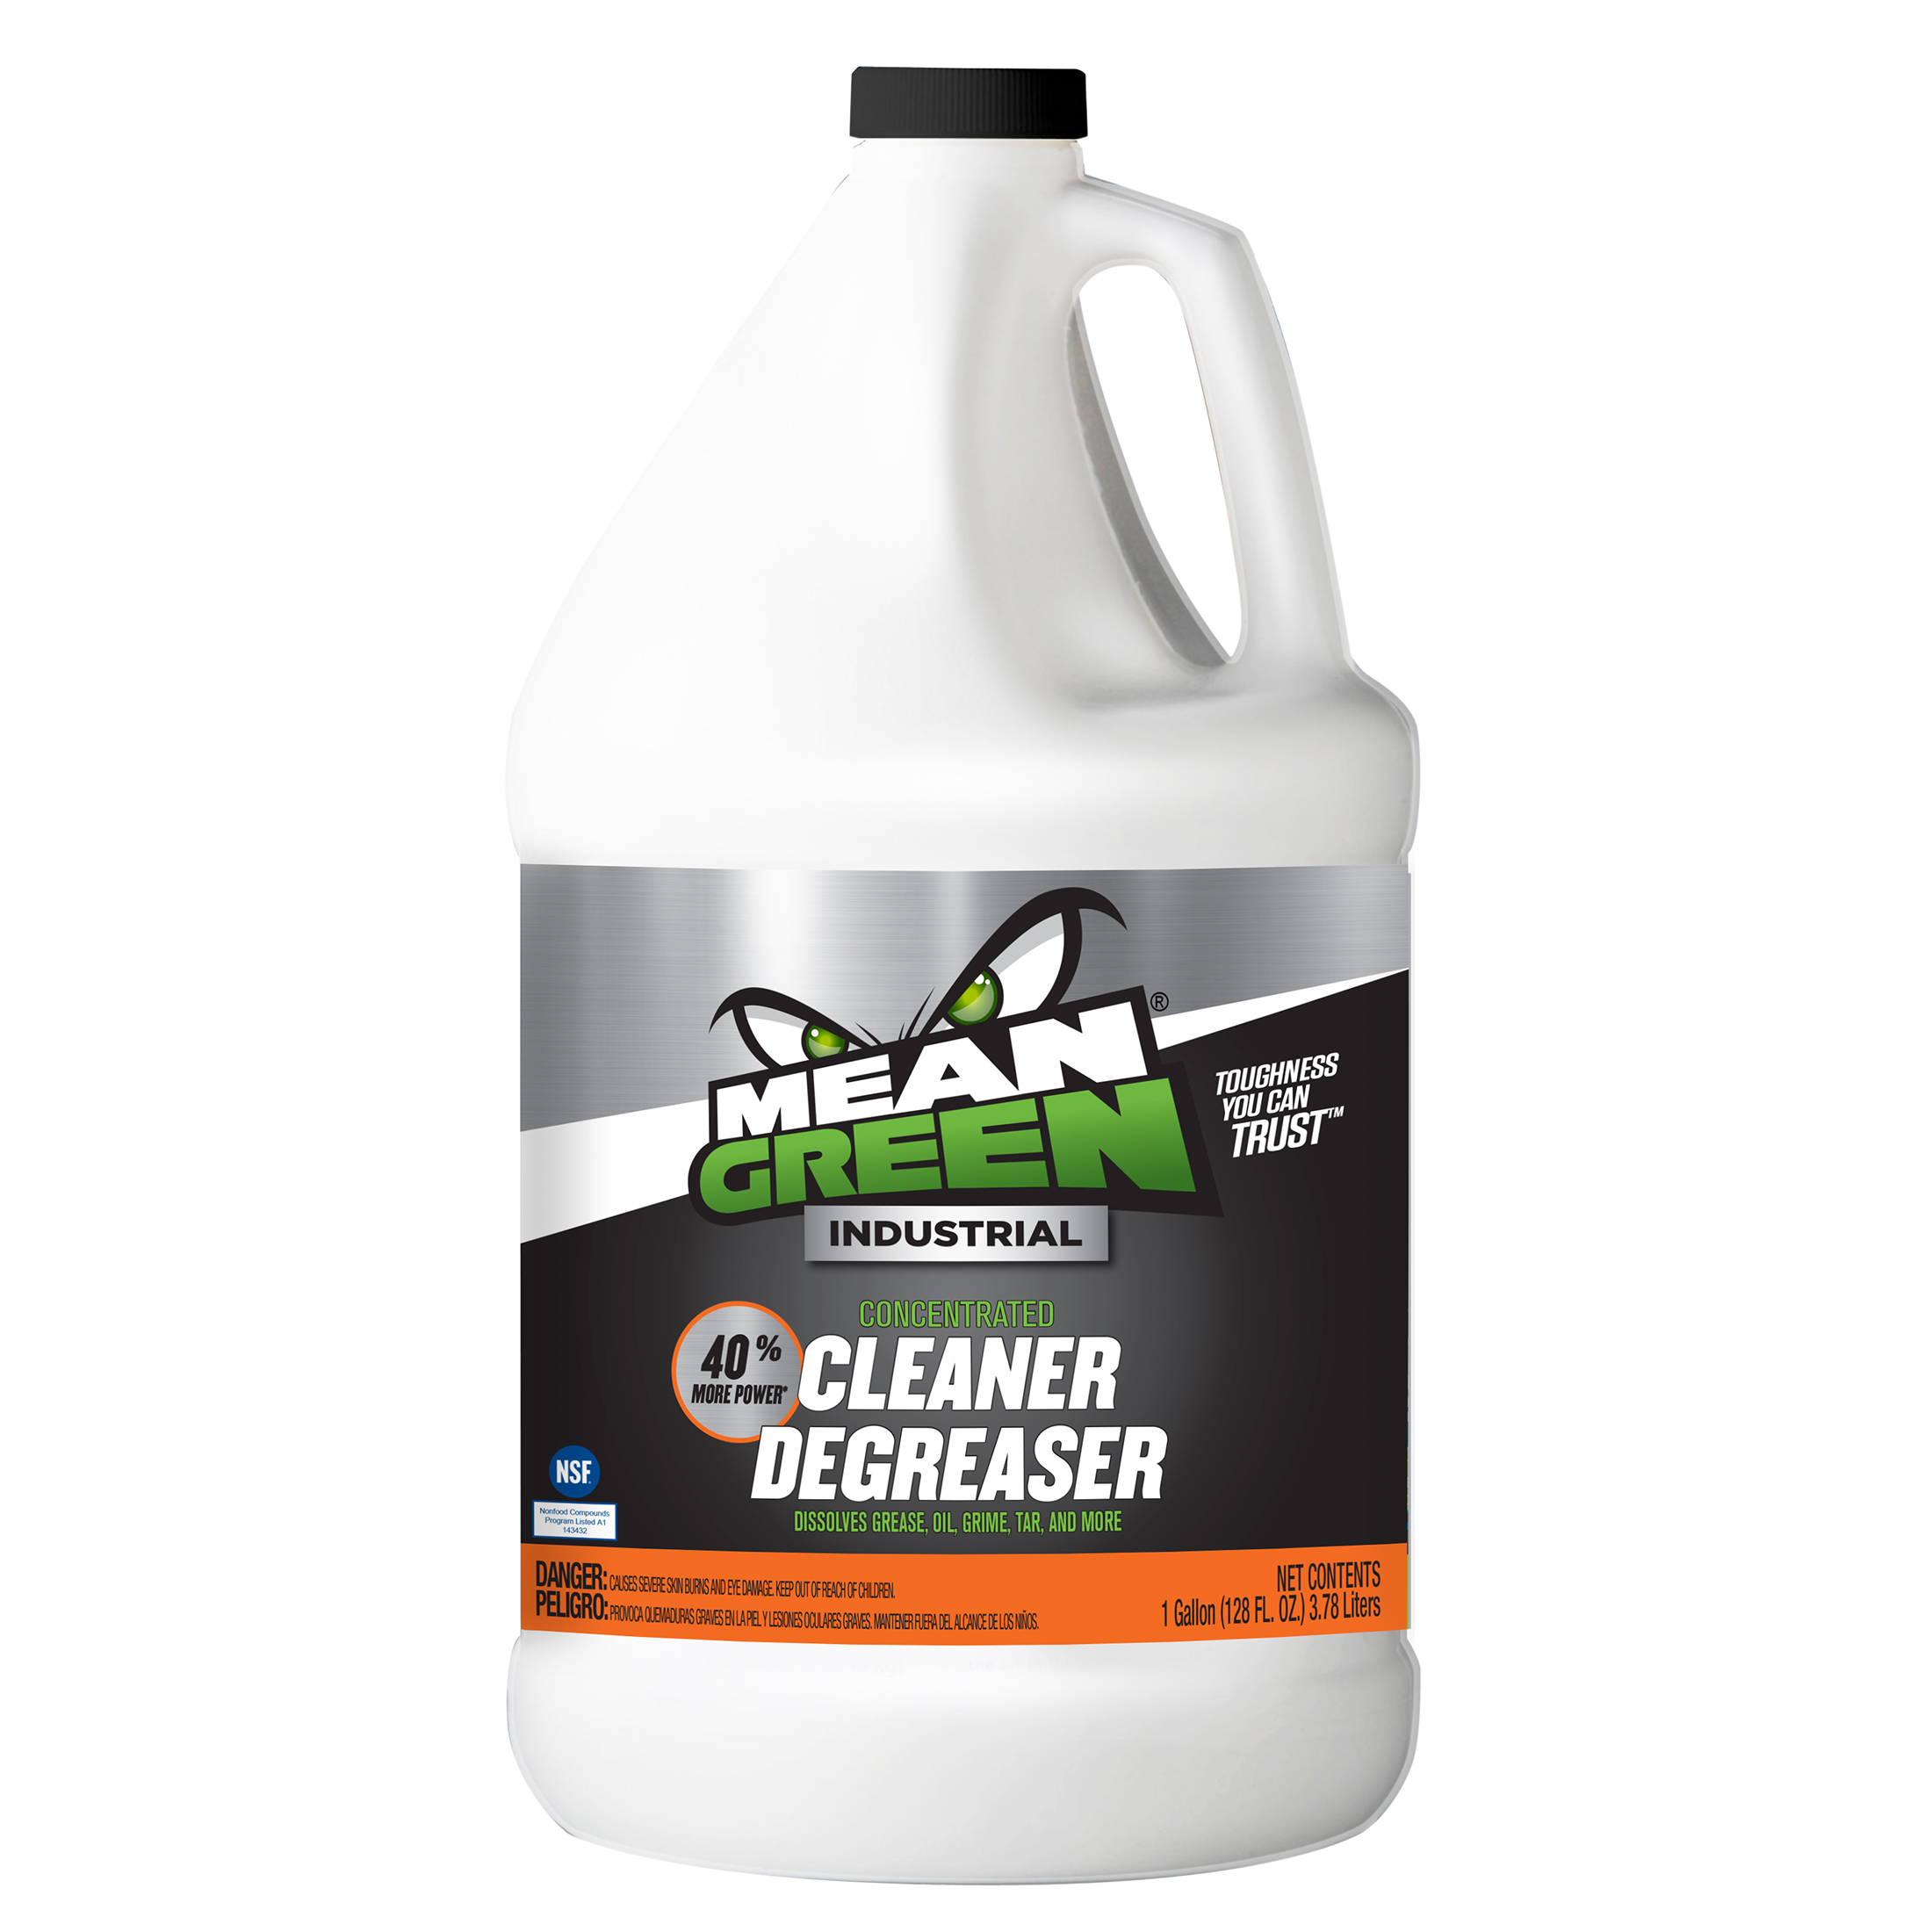 Mean Green Industrial Strength Cleaner and Degreaser, 1 Gallon